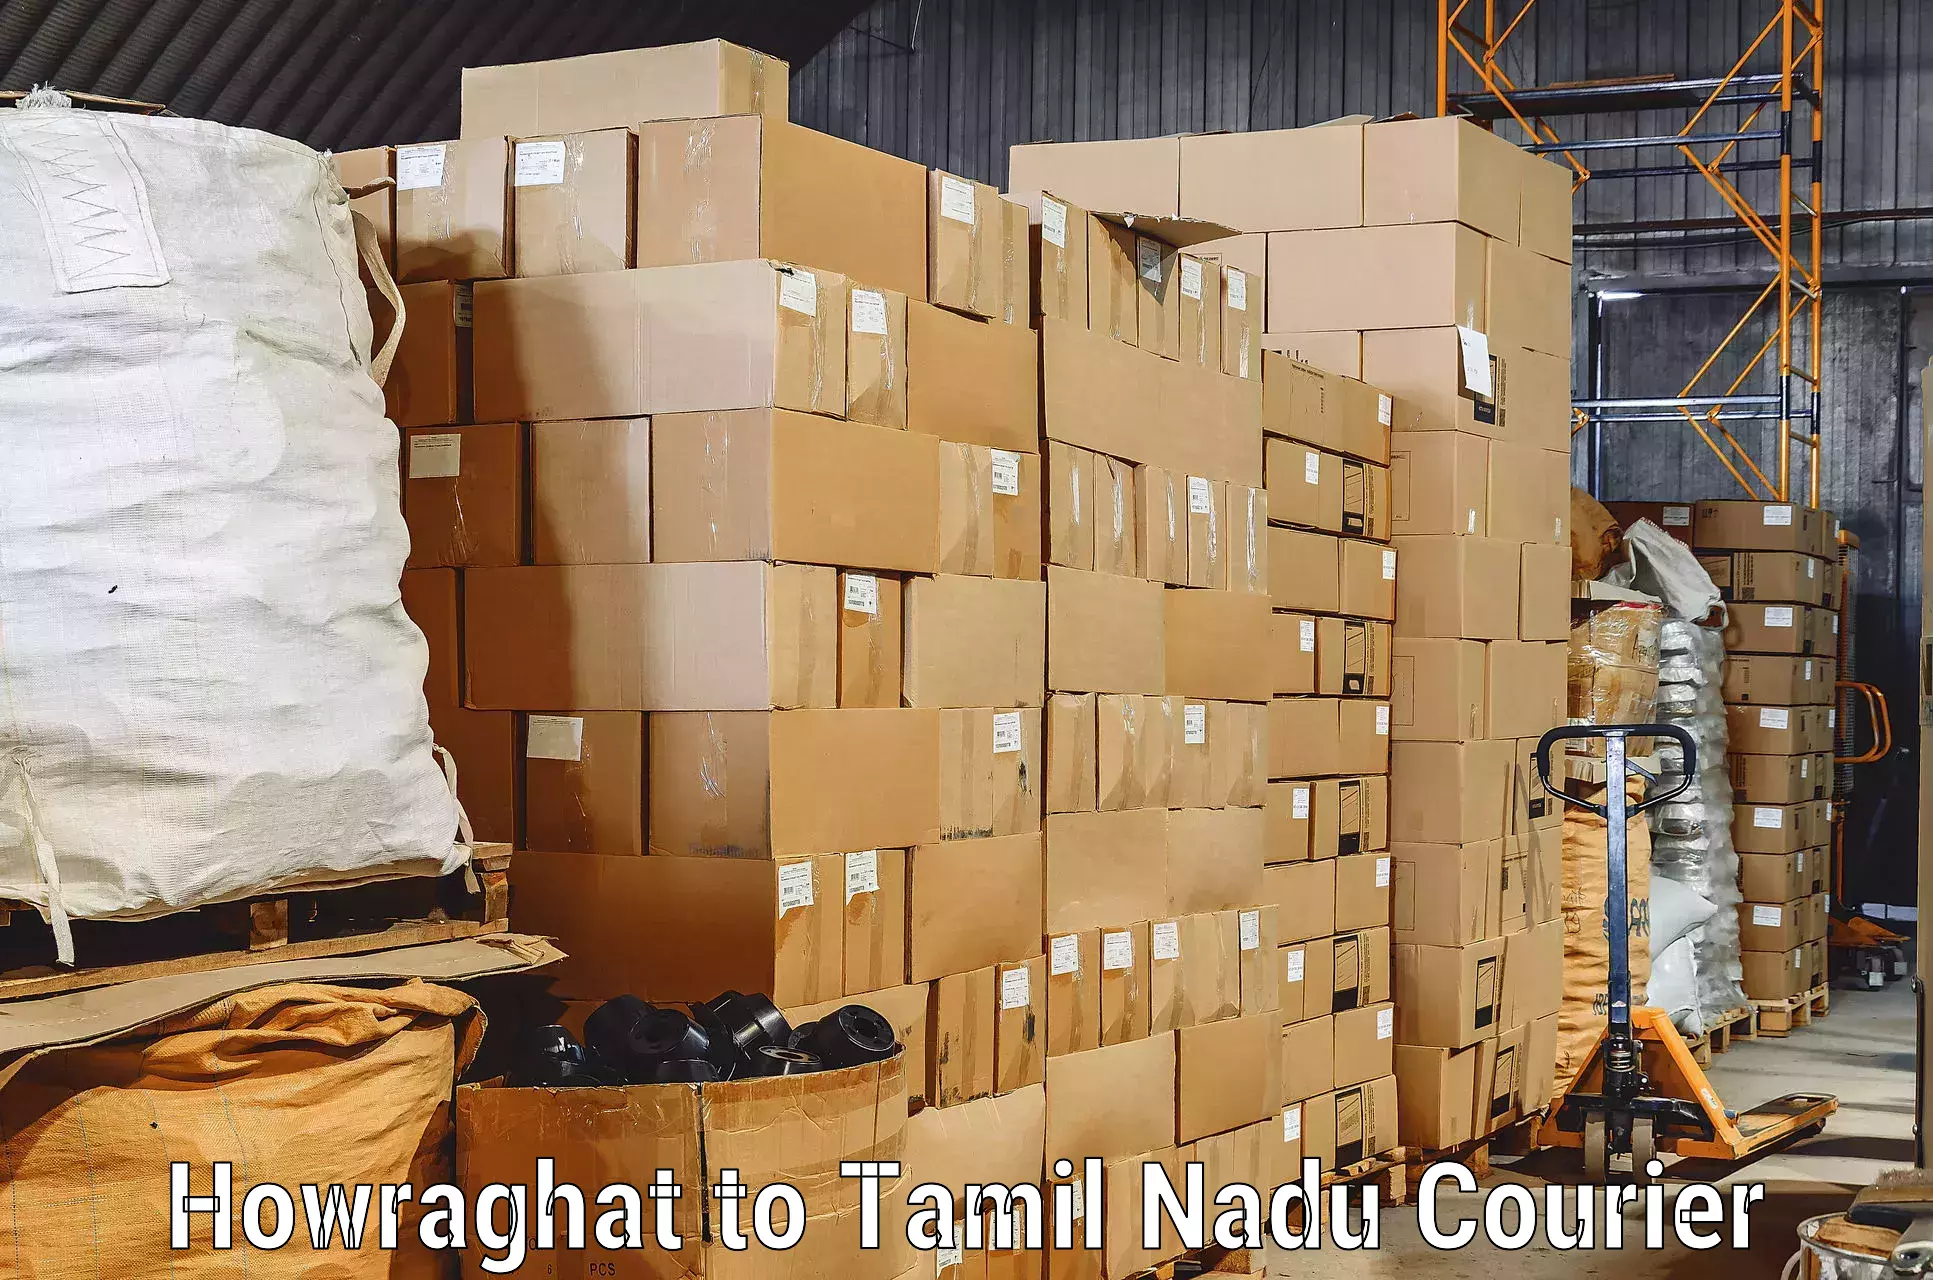 Moving and packing experts Howraghat to Tirunelveli